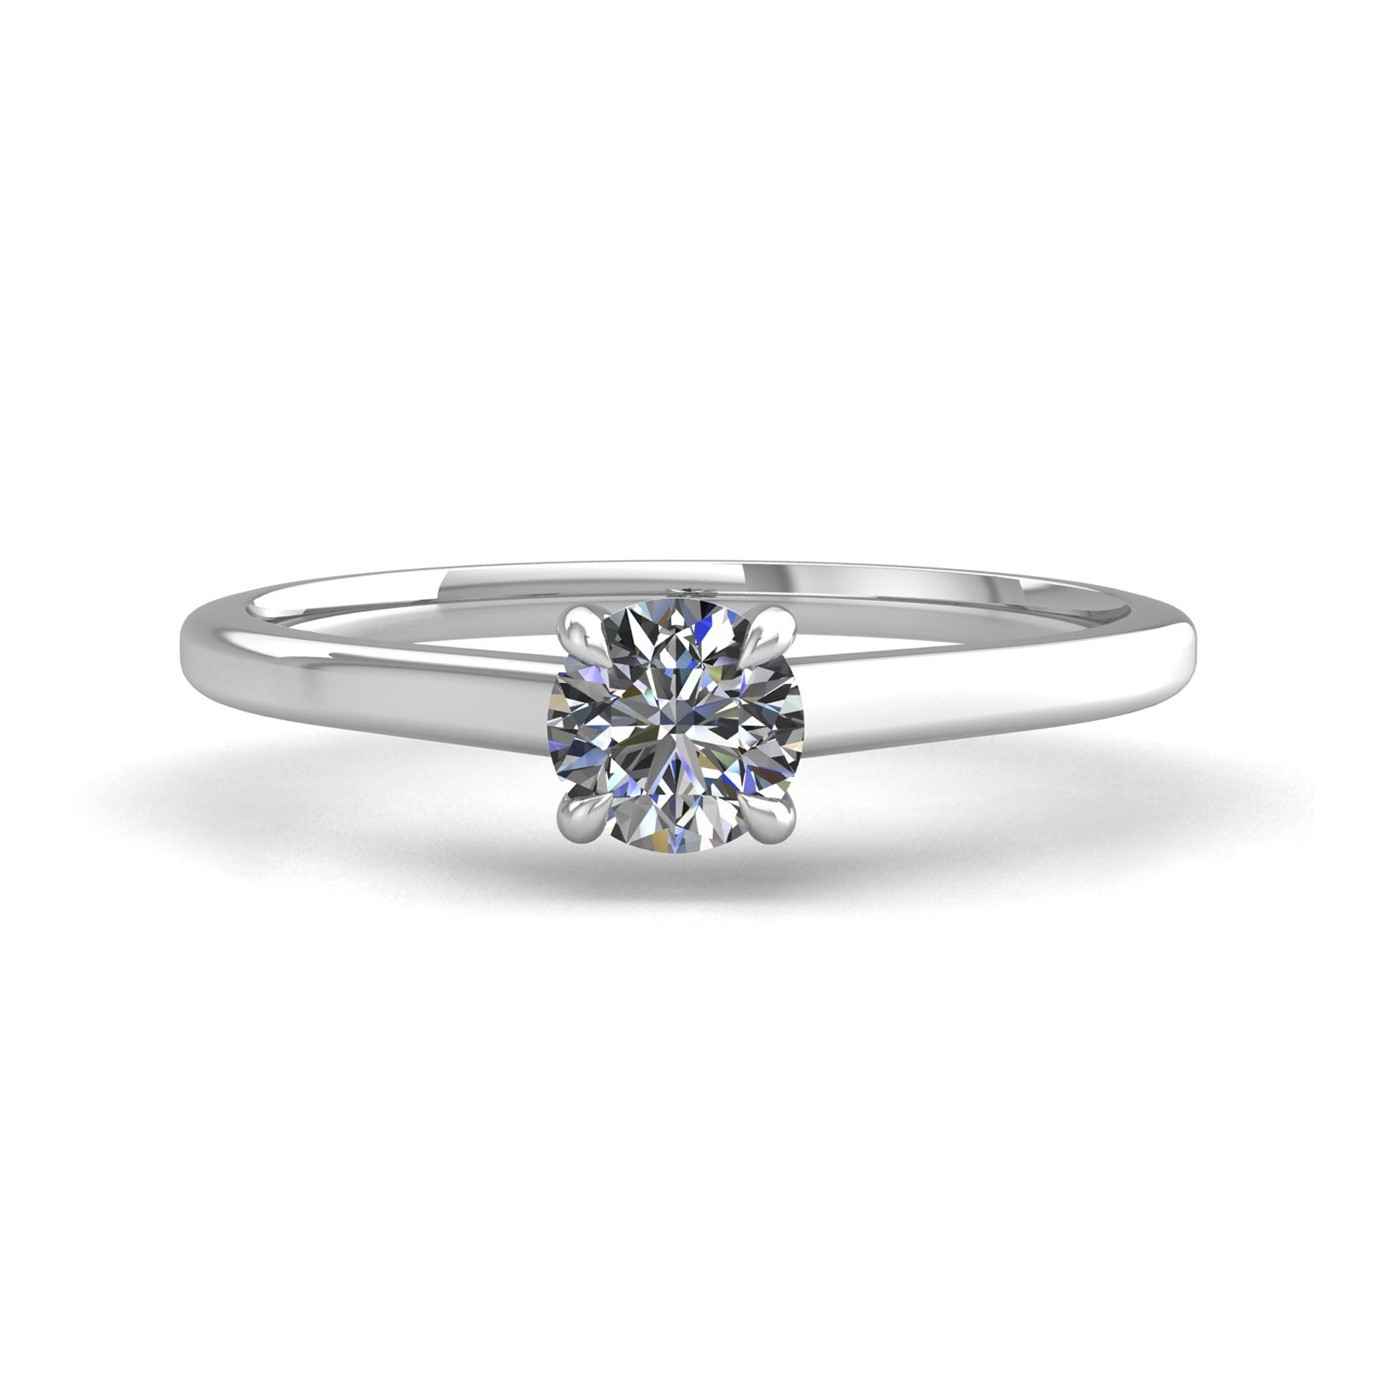 18k white gold 0,80 ct 4 prongs solitaire round cut diamond engagement ring with whisper thin band Photos & images